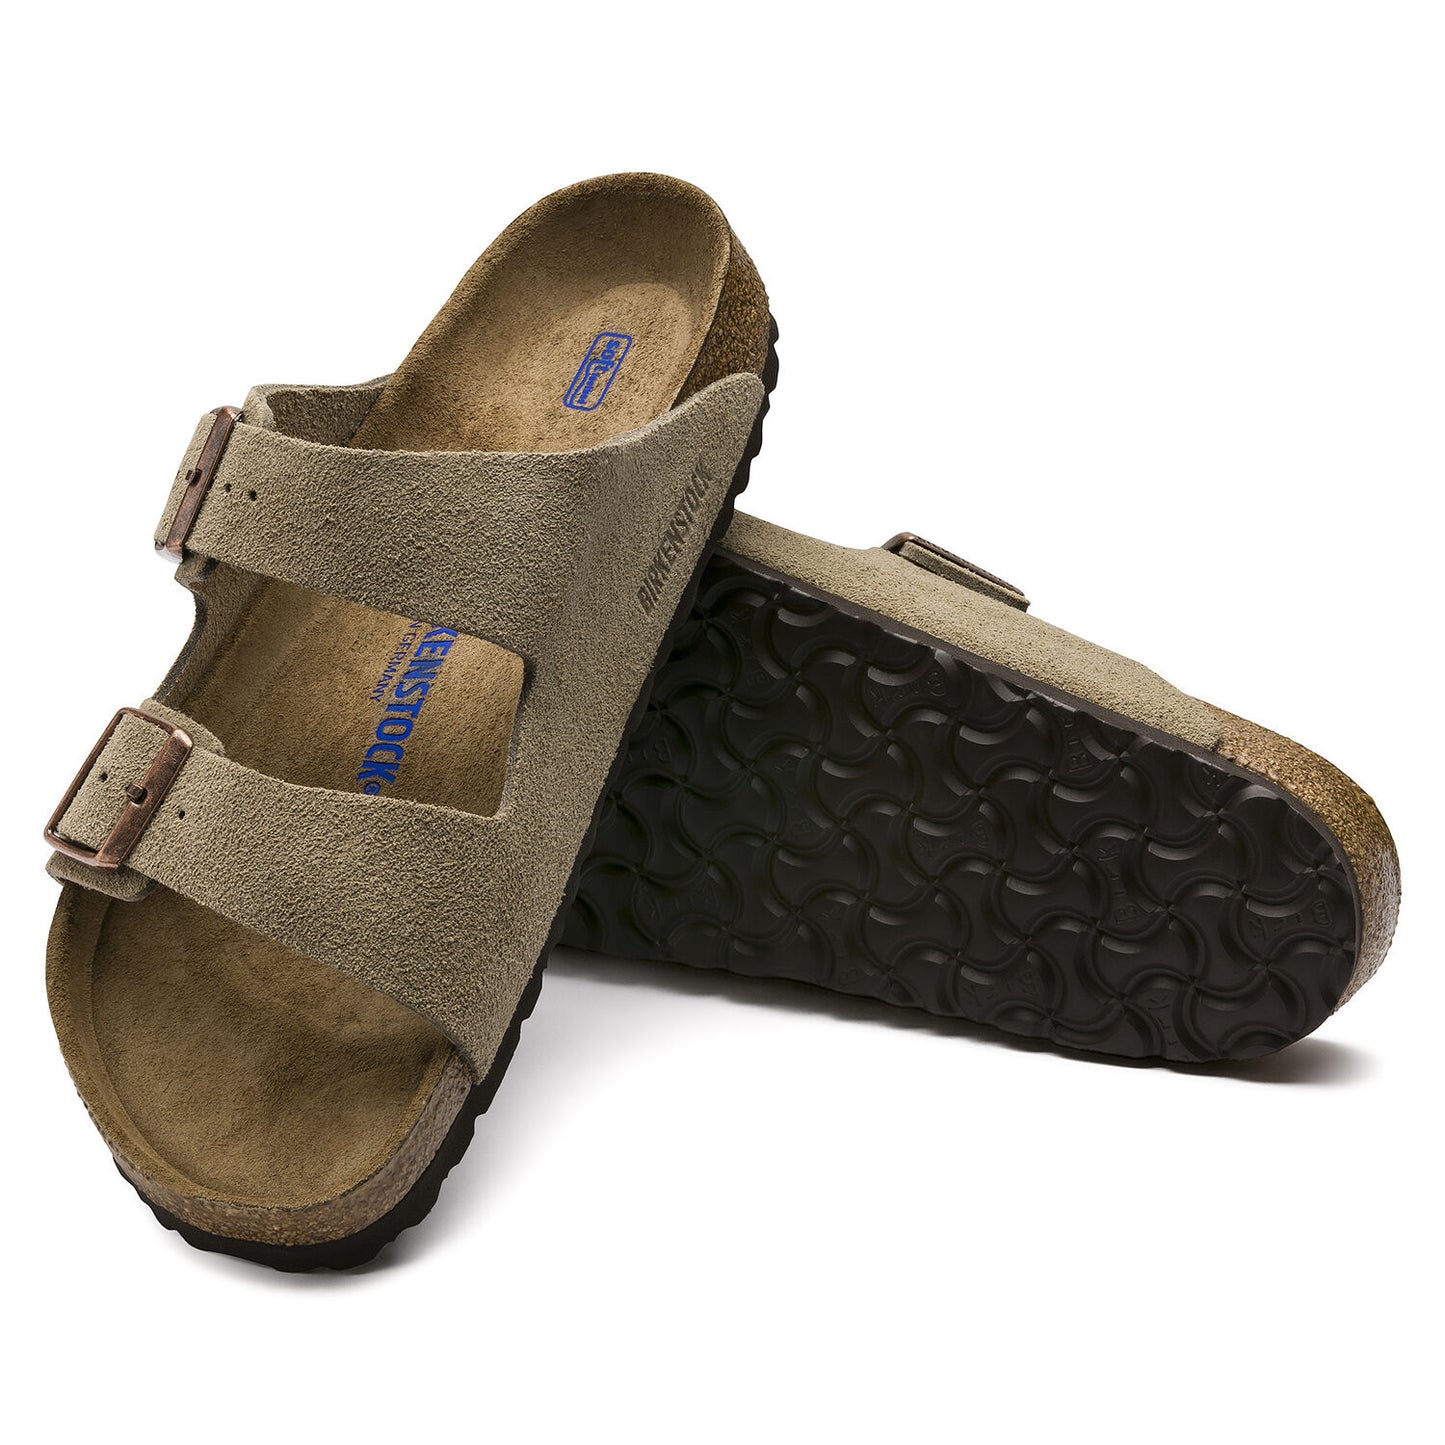 Arizona Soft Footbed Taupe Suede Leather Sandal - Taupe- Regular/Wide